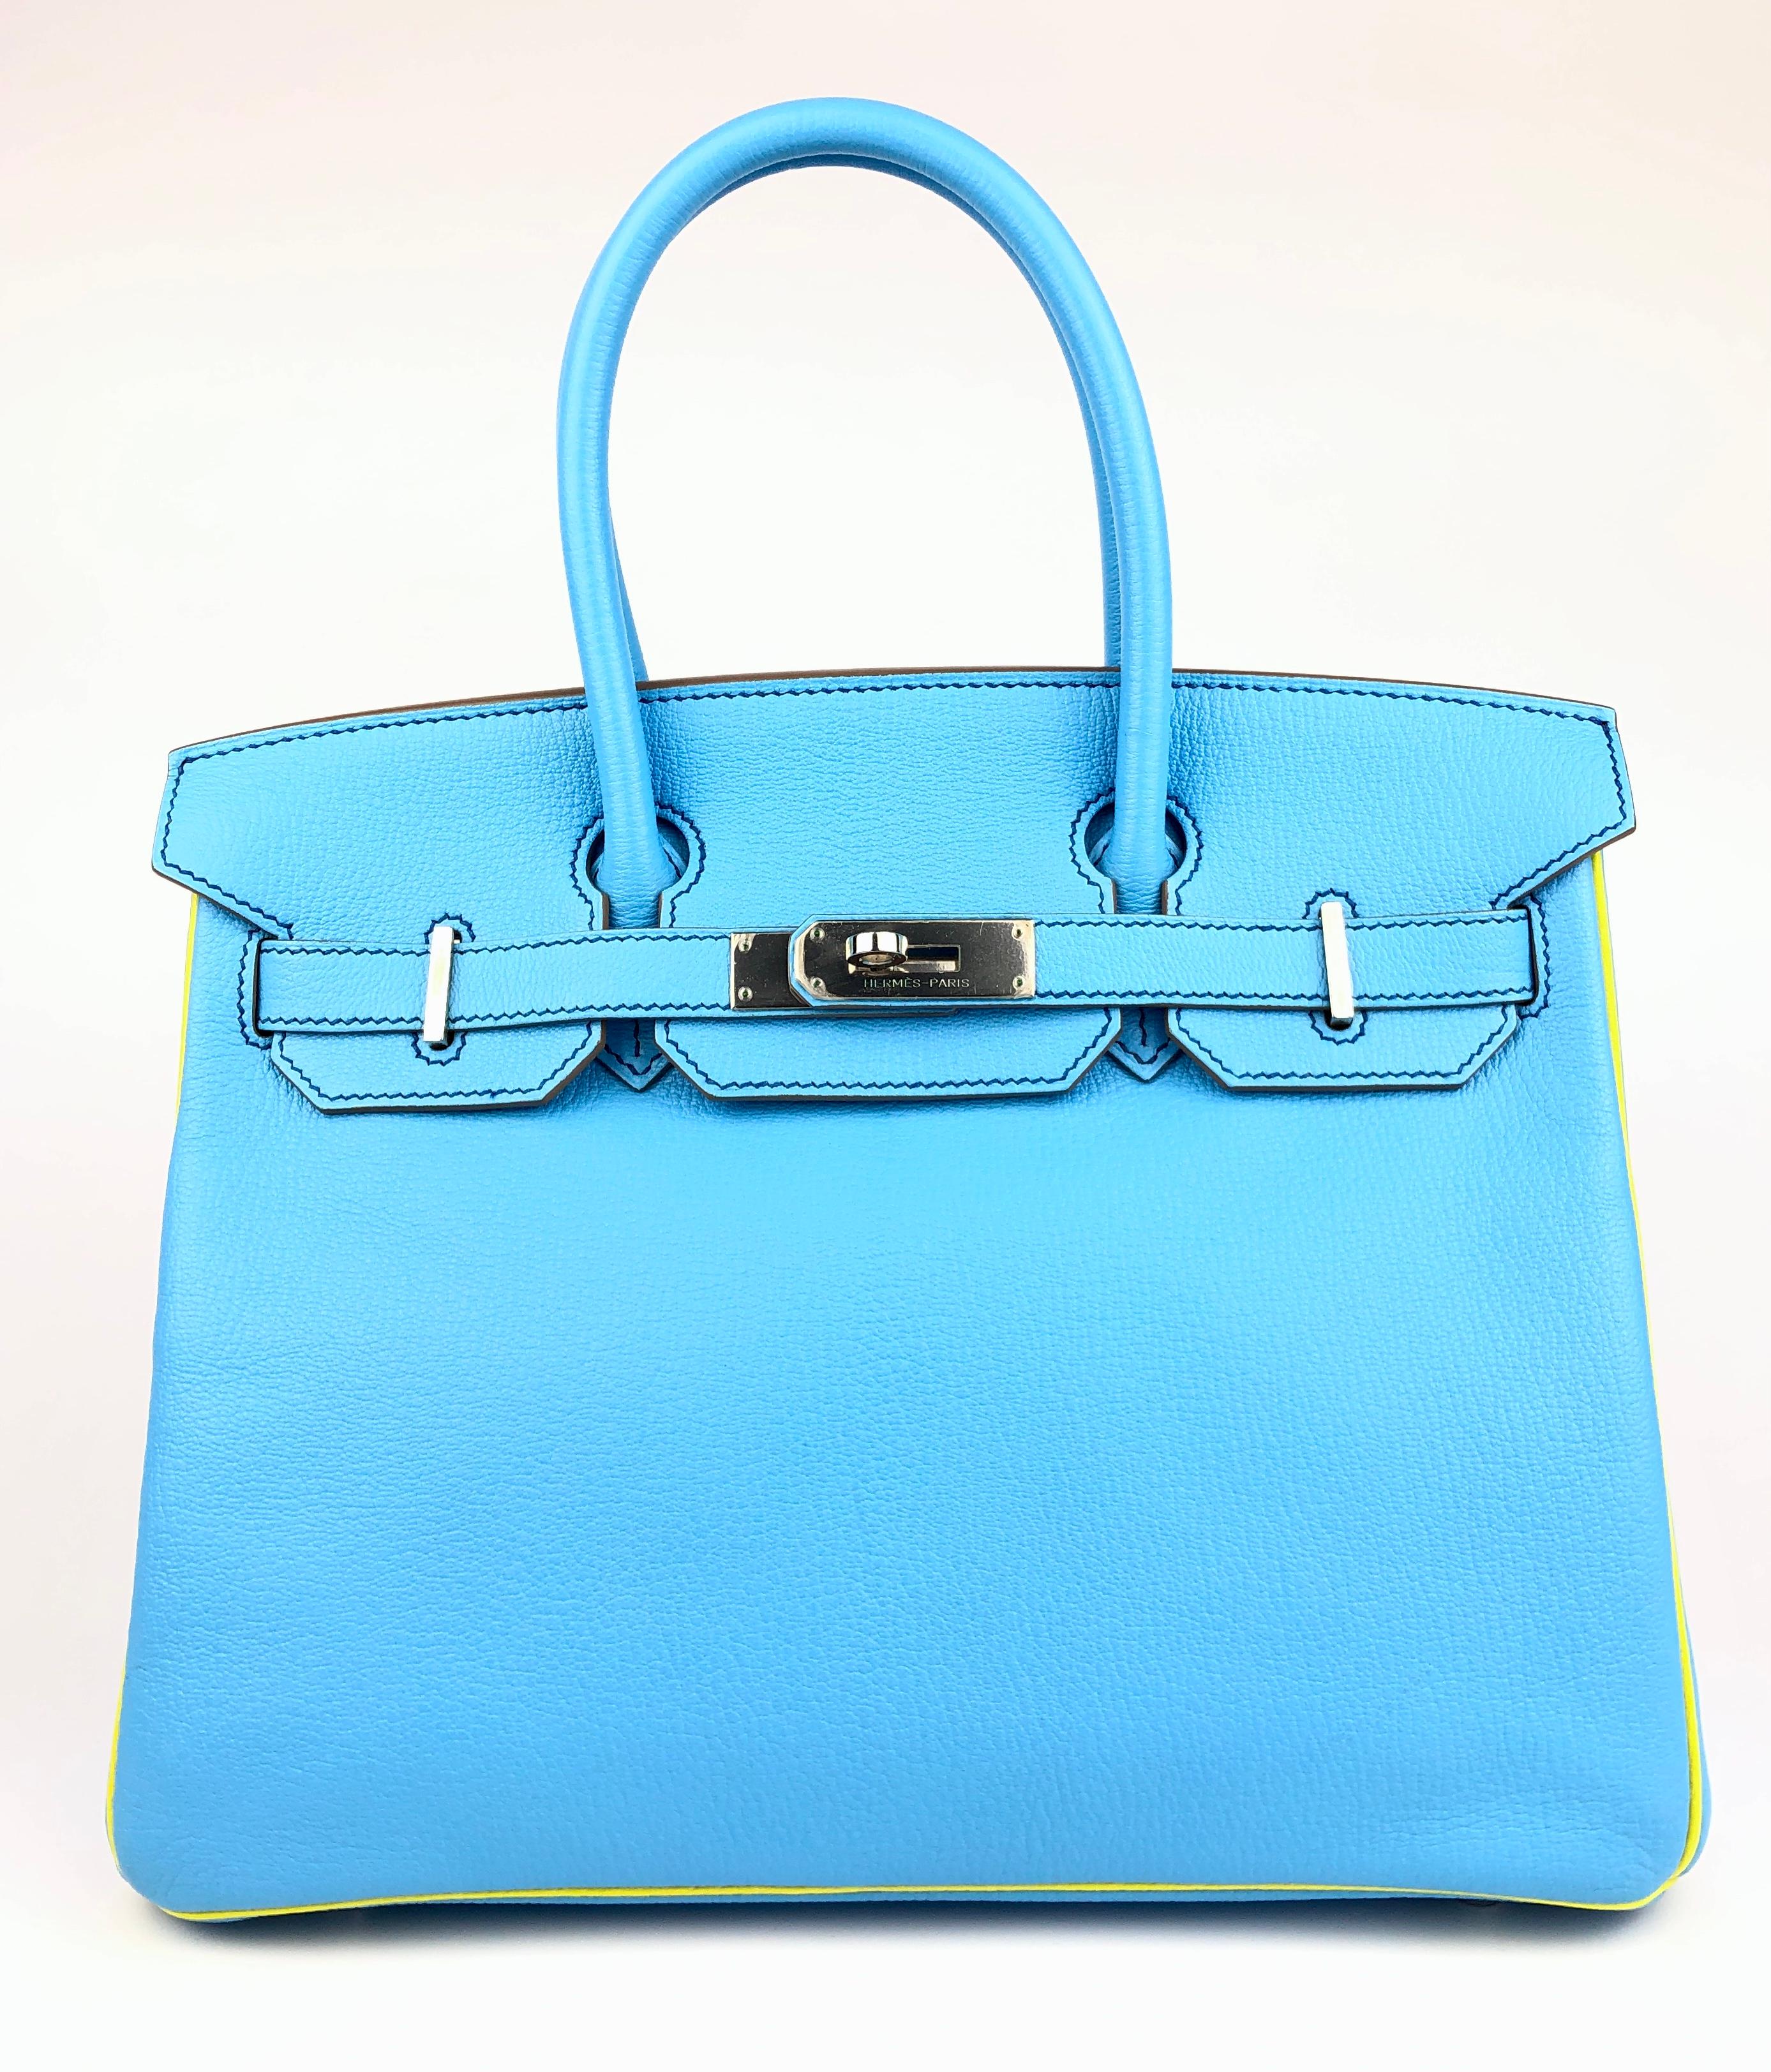 Stunning 1 of 1 Hermes Birkin 30 HSS Special Order Blue Ciel & Lime  Chèvre Leather Complimented by Palladium Hardware. Excellent condition with plastic on hardware. 

Shop with Confidence from Lux Addicts. Authenticity Guaranteed! 